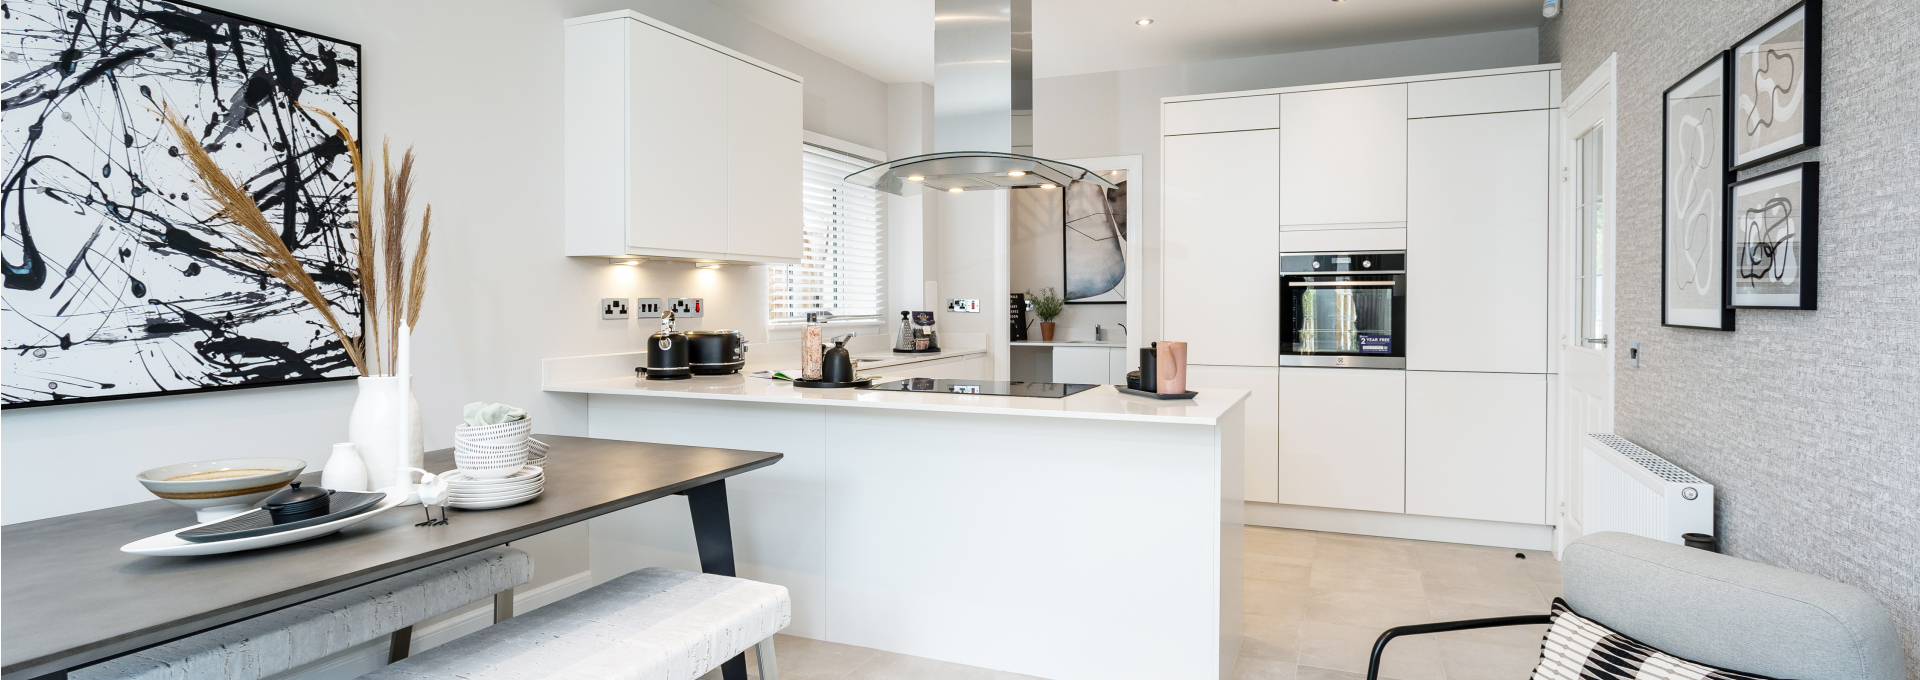 Dawn Homes | New Houses To Buy In Scotland - Specification 2